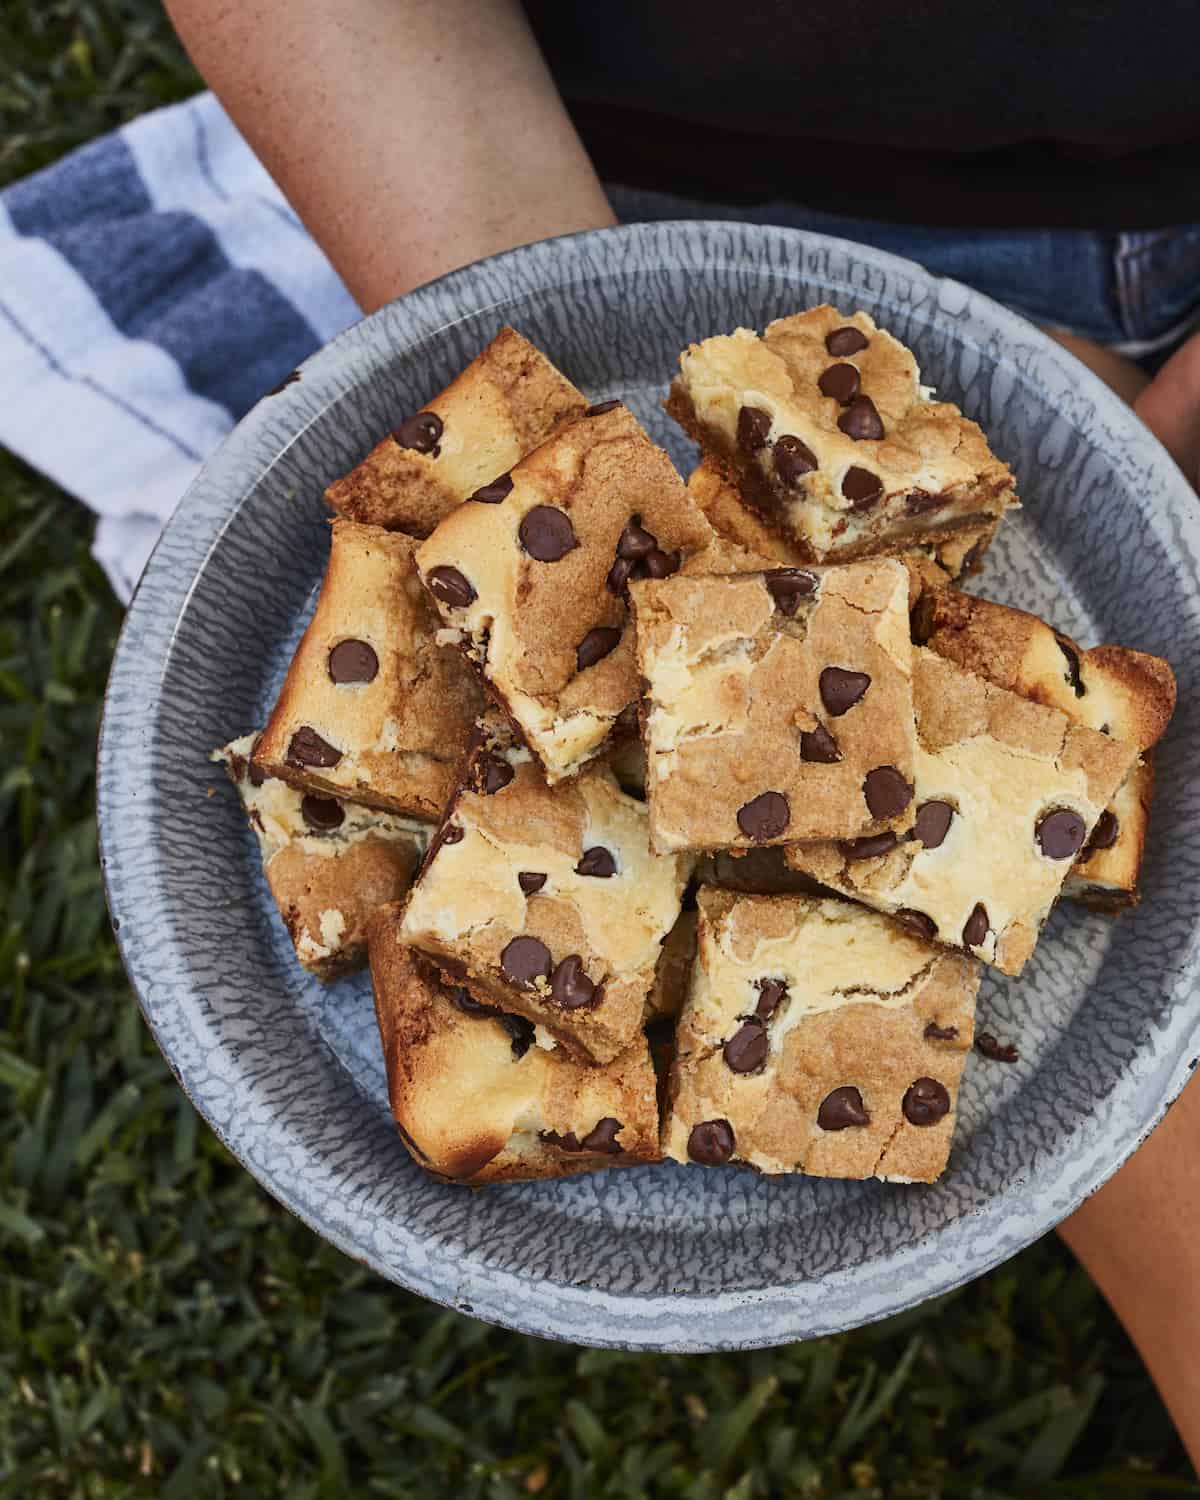 A plate of cheesecake cookie bars with chocolate chips being held by a person.  